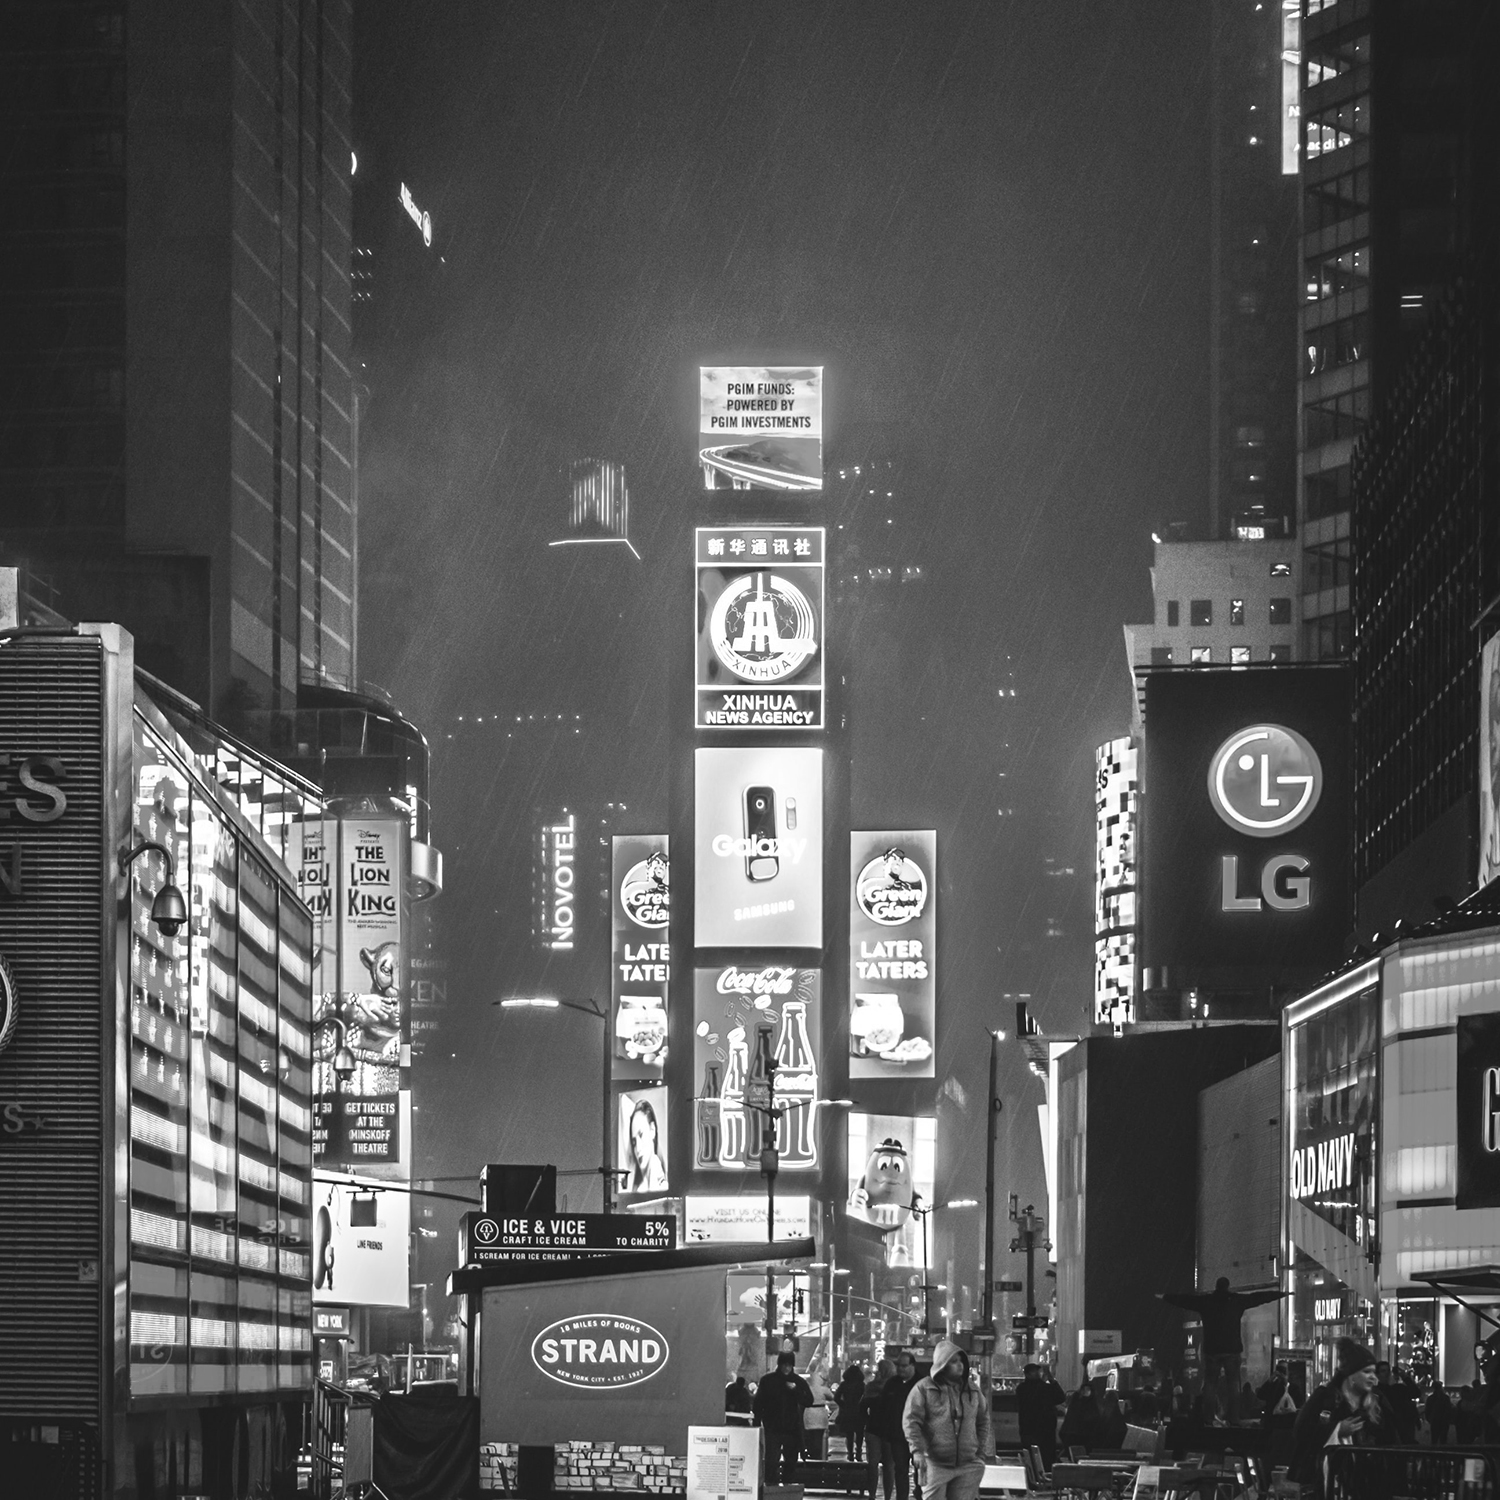 Times Square at night in the rain